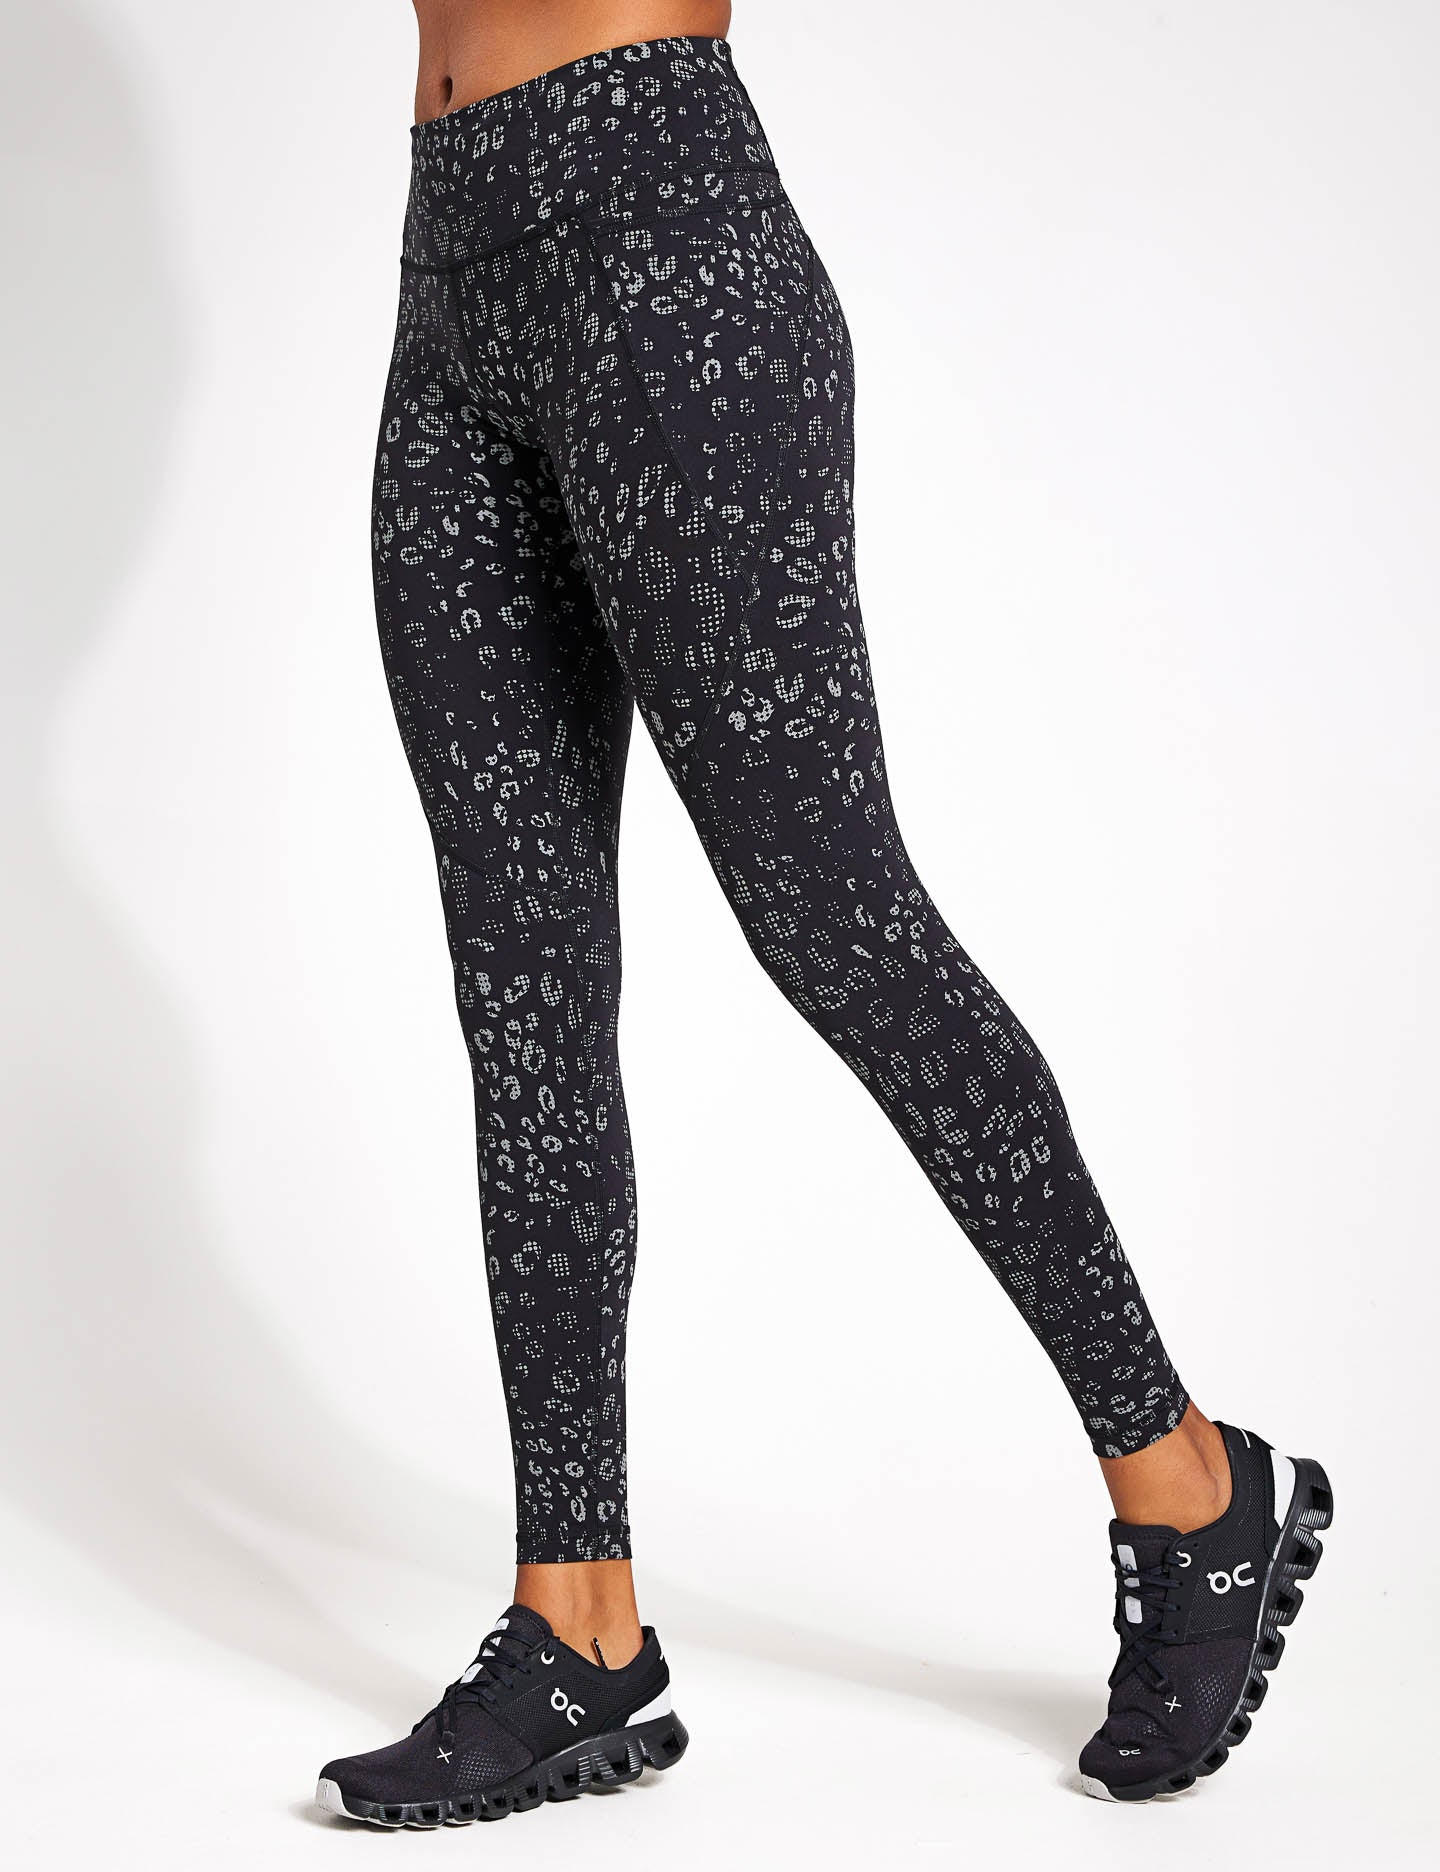 Colourful leopard leggings for a woman